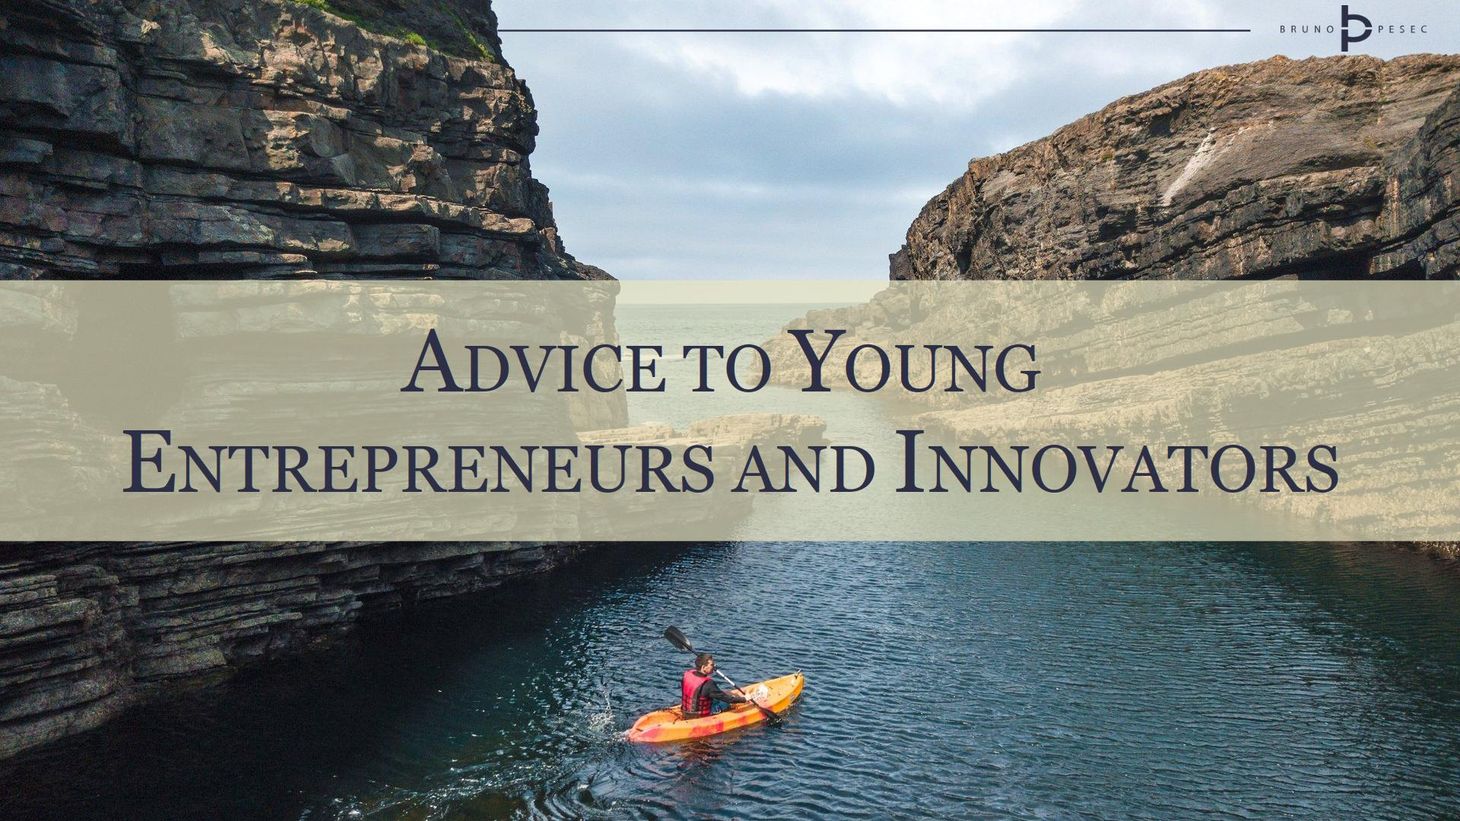 Advice to young entrepreneurs and innovators